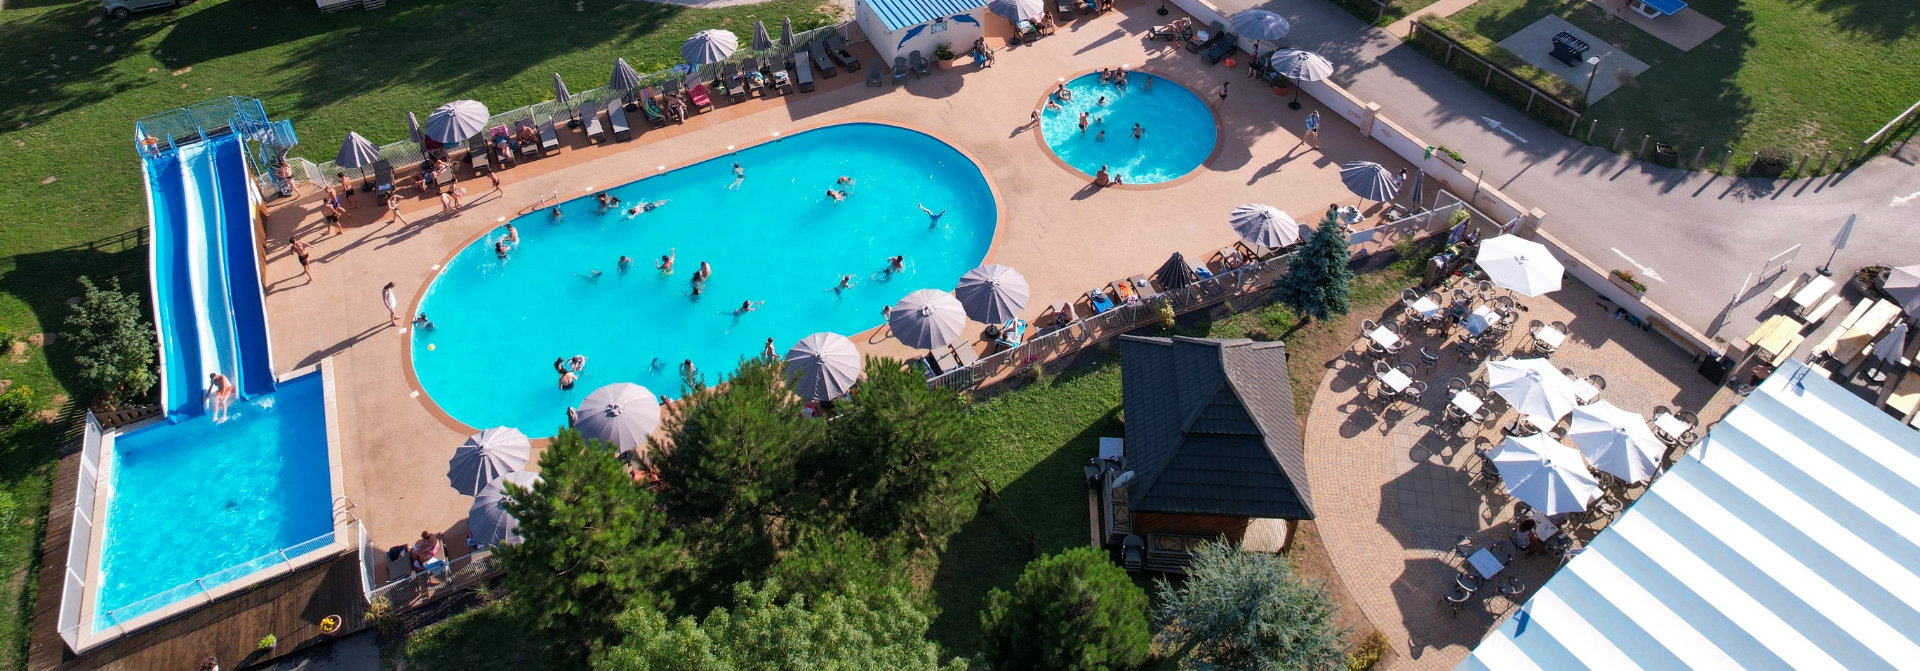 Aerial view of the water park at Les Bords de Loue campsite on the riverside